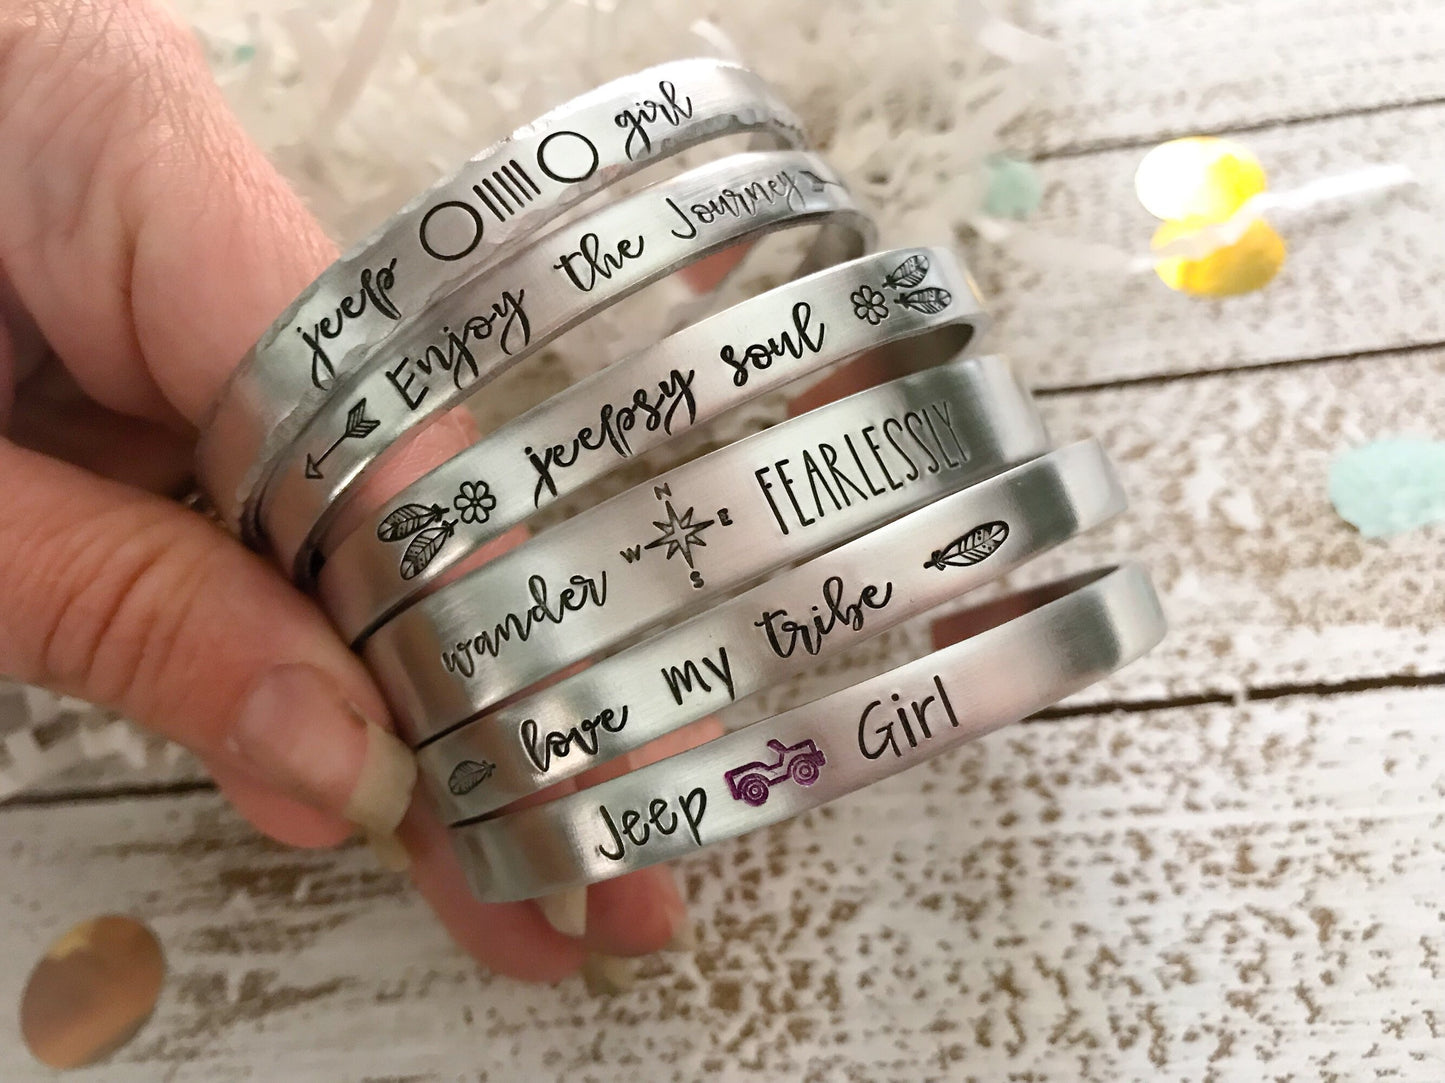 Life is tough, but so are you bracelet--strong woman--hand stamped cuff bracelet--skinny silver mantra bracelet--gift under 20--christmas gi